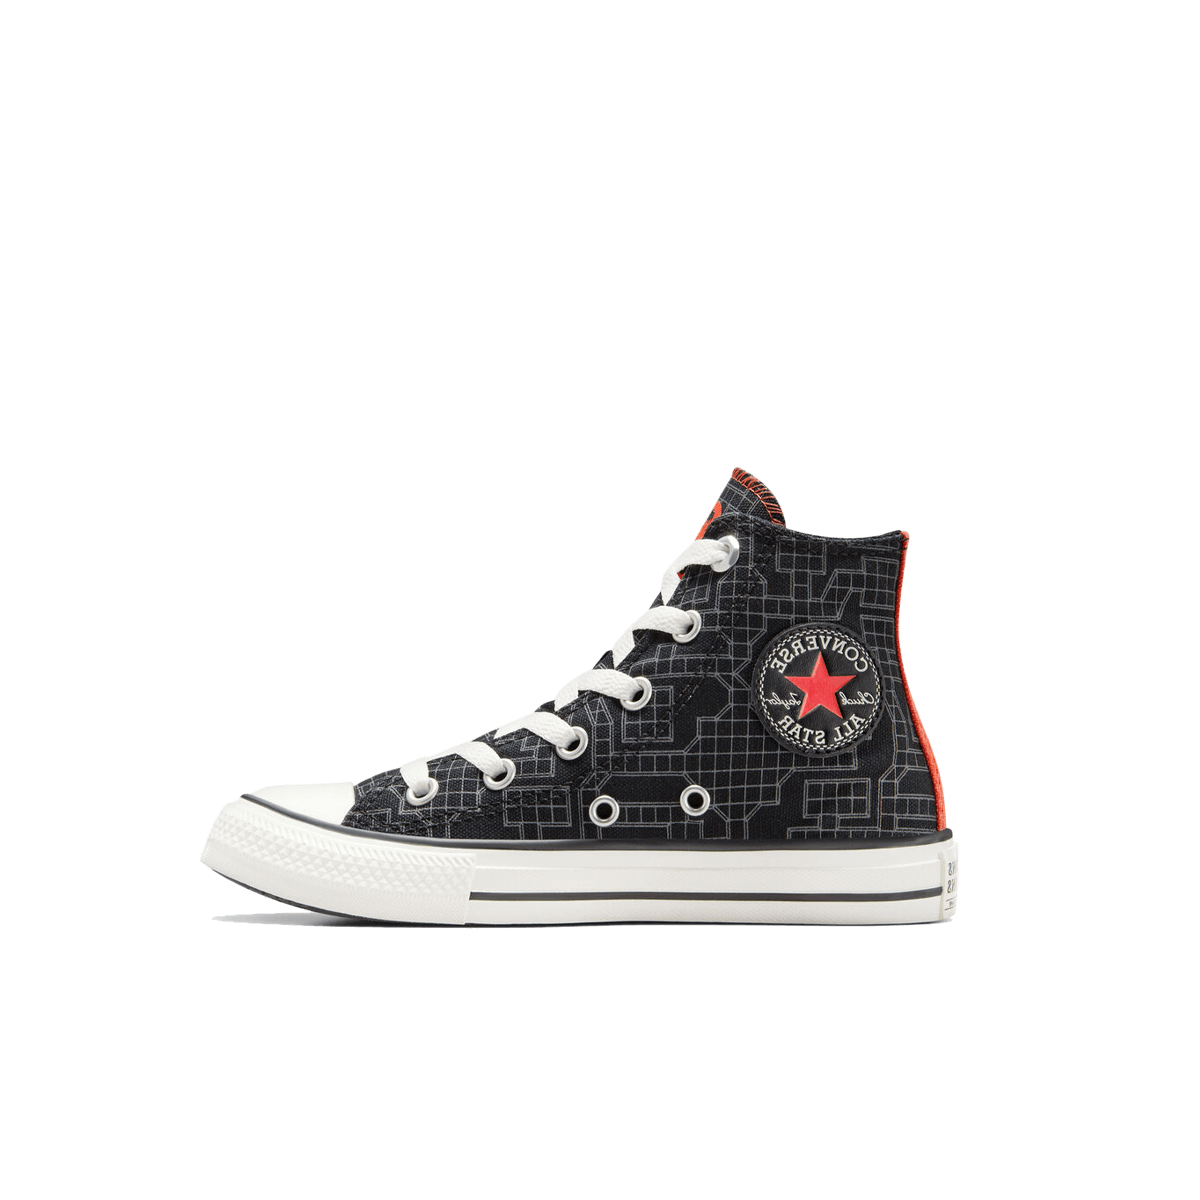 Dungeons & Dragons x Converse Chuck Taylor All Star PS 'D20 Dice'